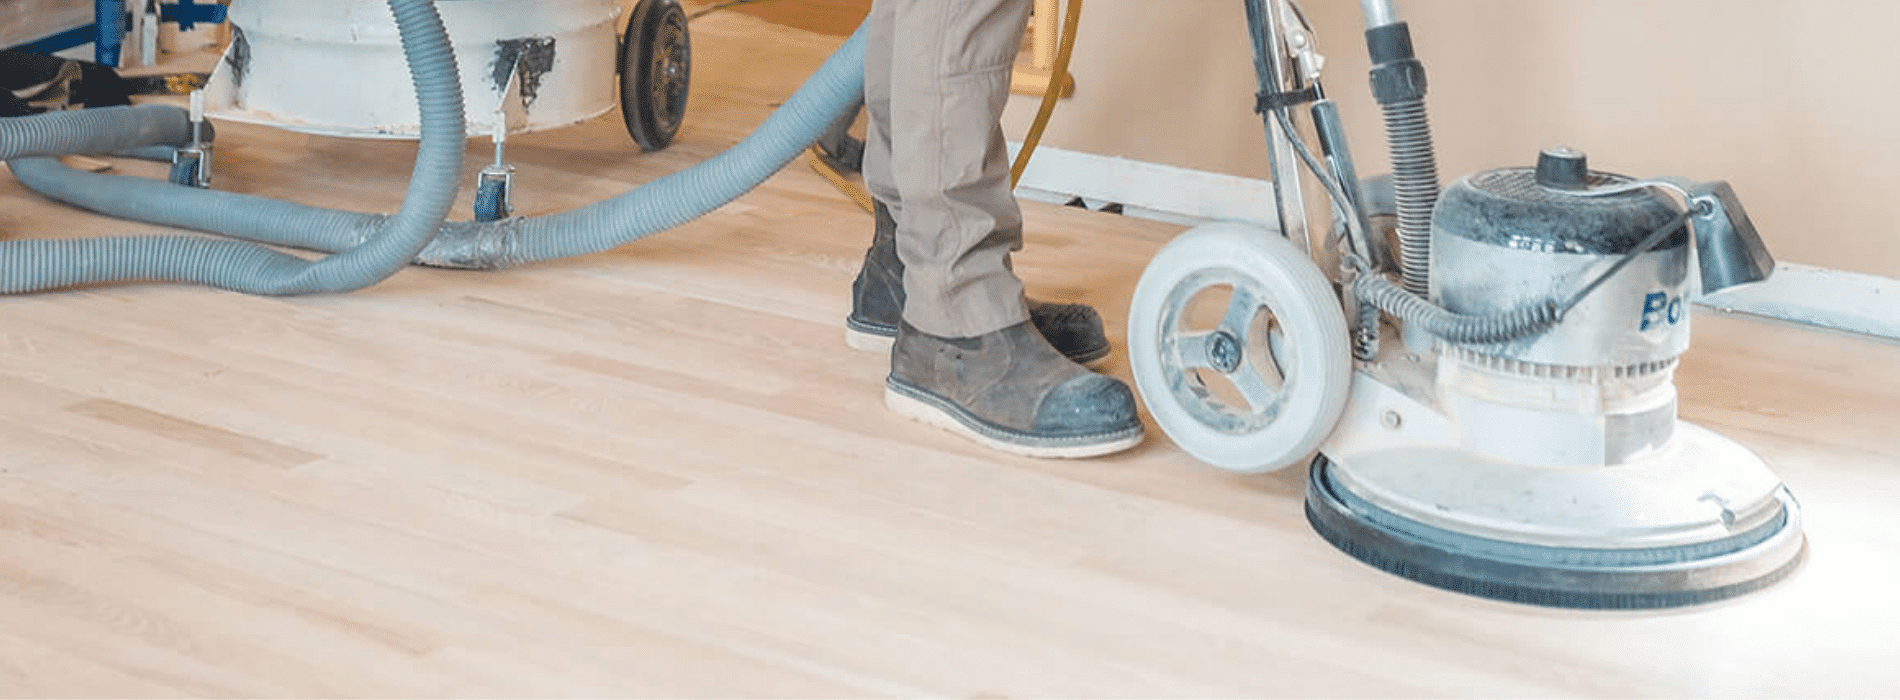 Mr Sander® in action, sanding a parquet floor in Bracknell, RG12, using a 2.2kW, 230V Bona buffer sander. The process is efficiently paired with a HEPA-filtered dust extraction system, ensuring a clean workspace and impeccable results.